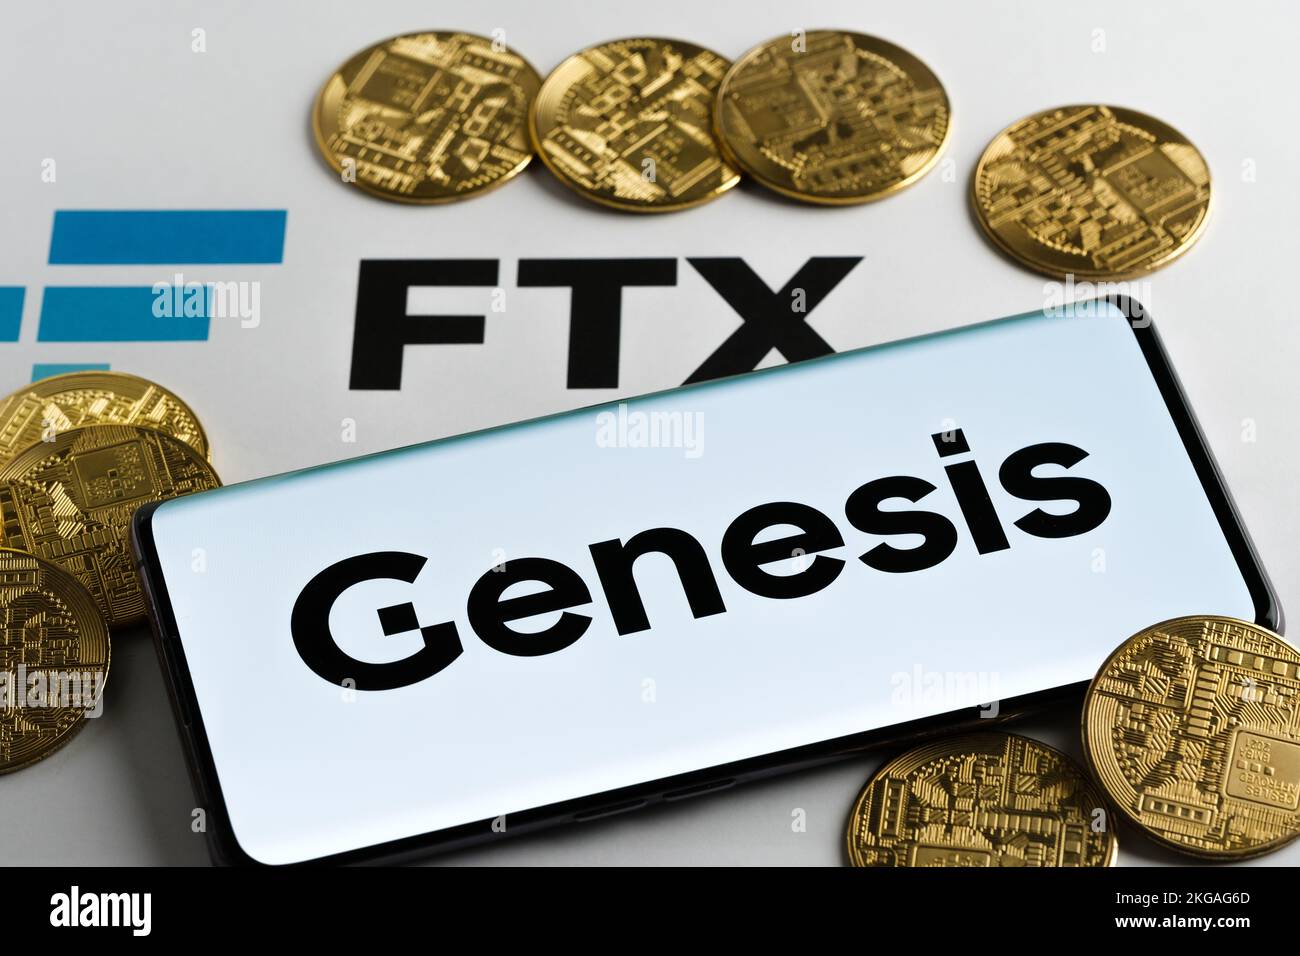 FTX and Genesis concept. Genesis Trading crypto company logo seen on